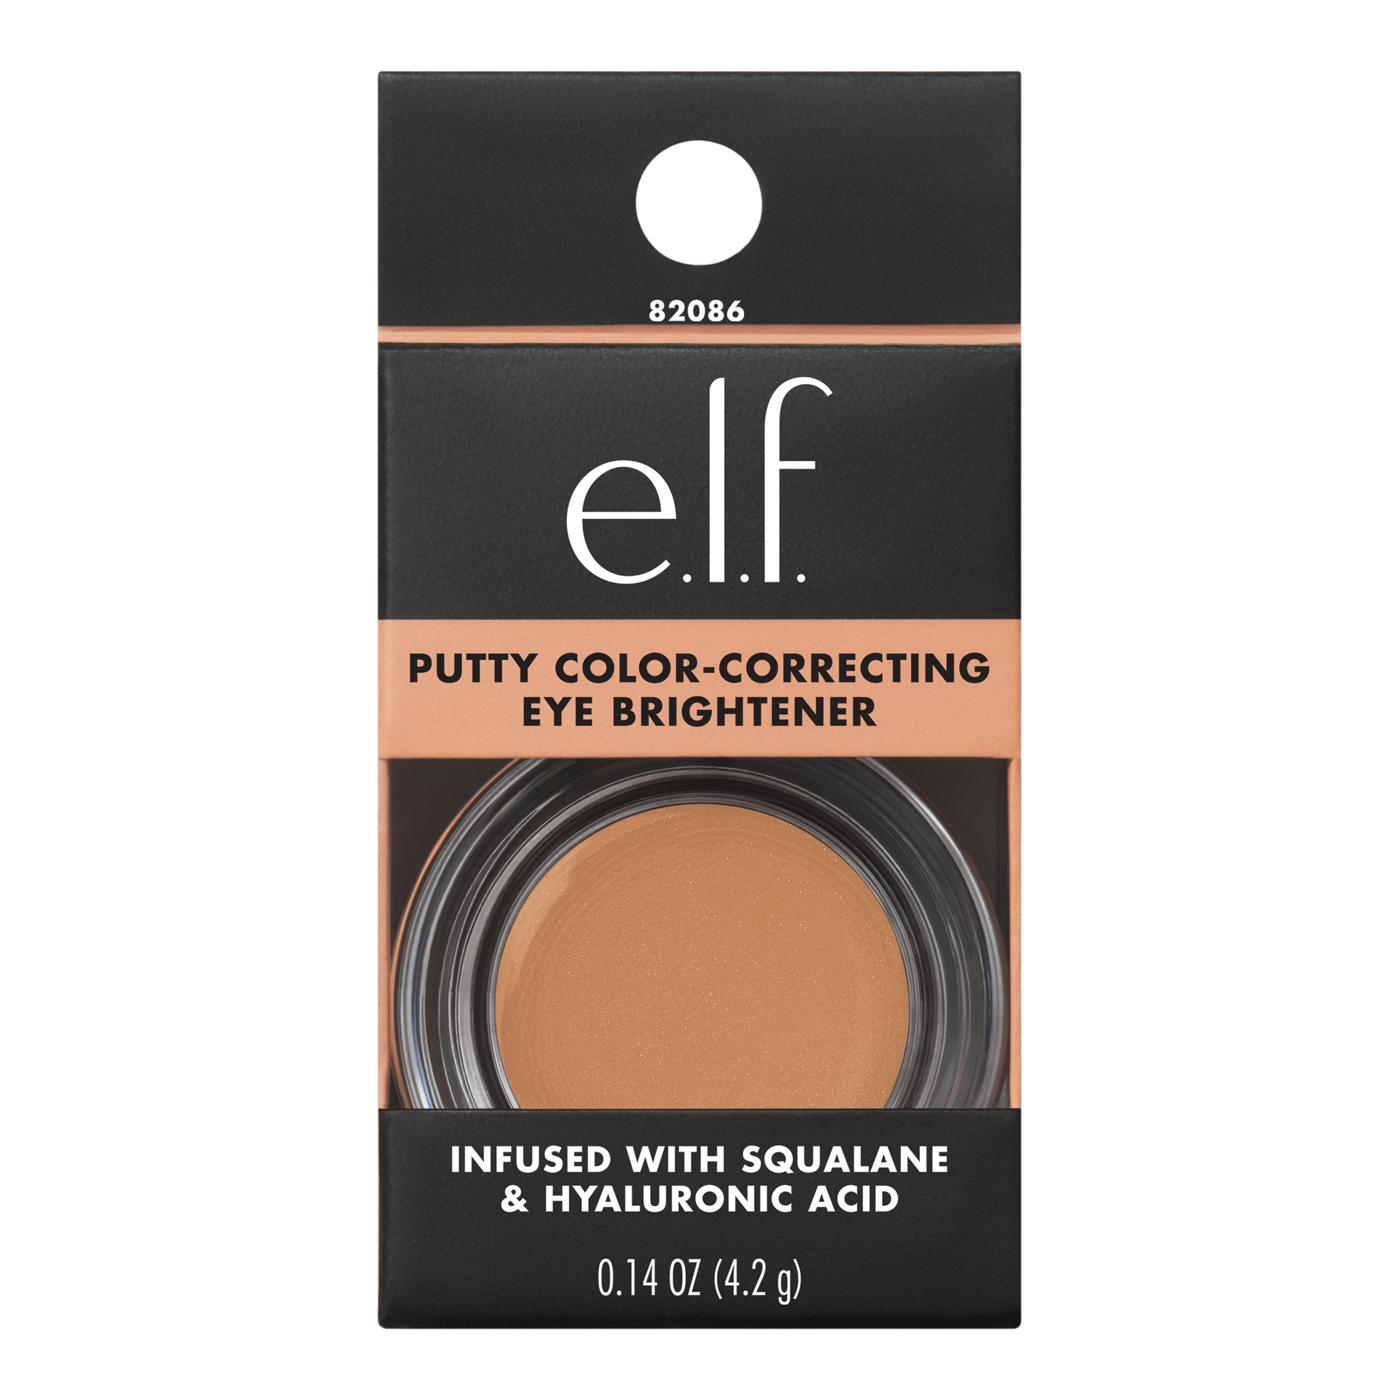 e.l.f. Putty Color-Correcting Eye Brightener; image 1 of 2